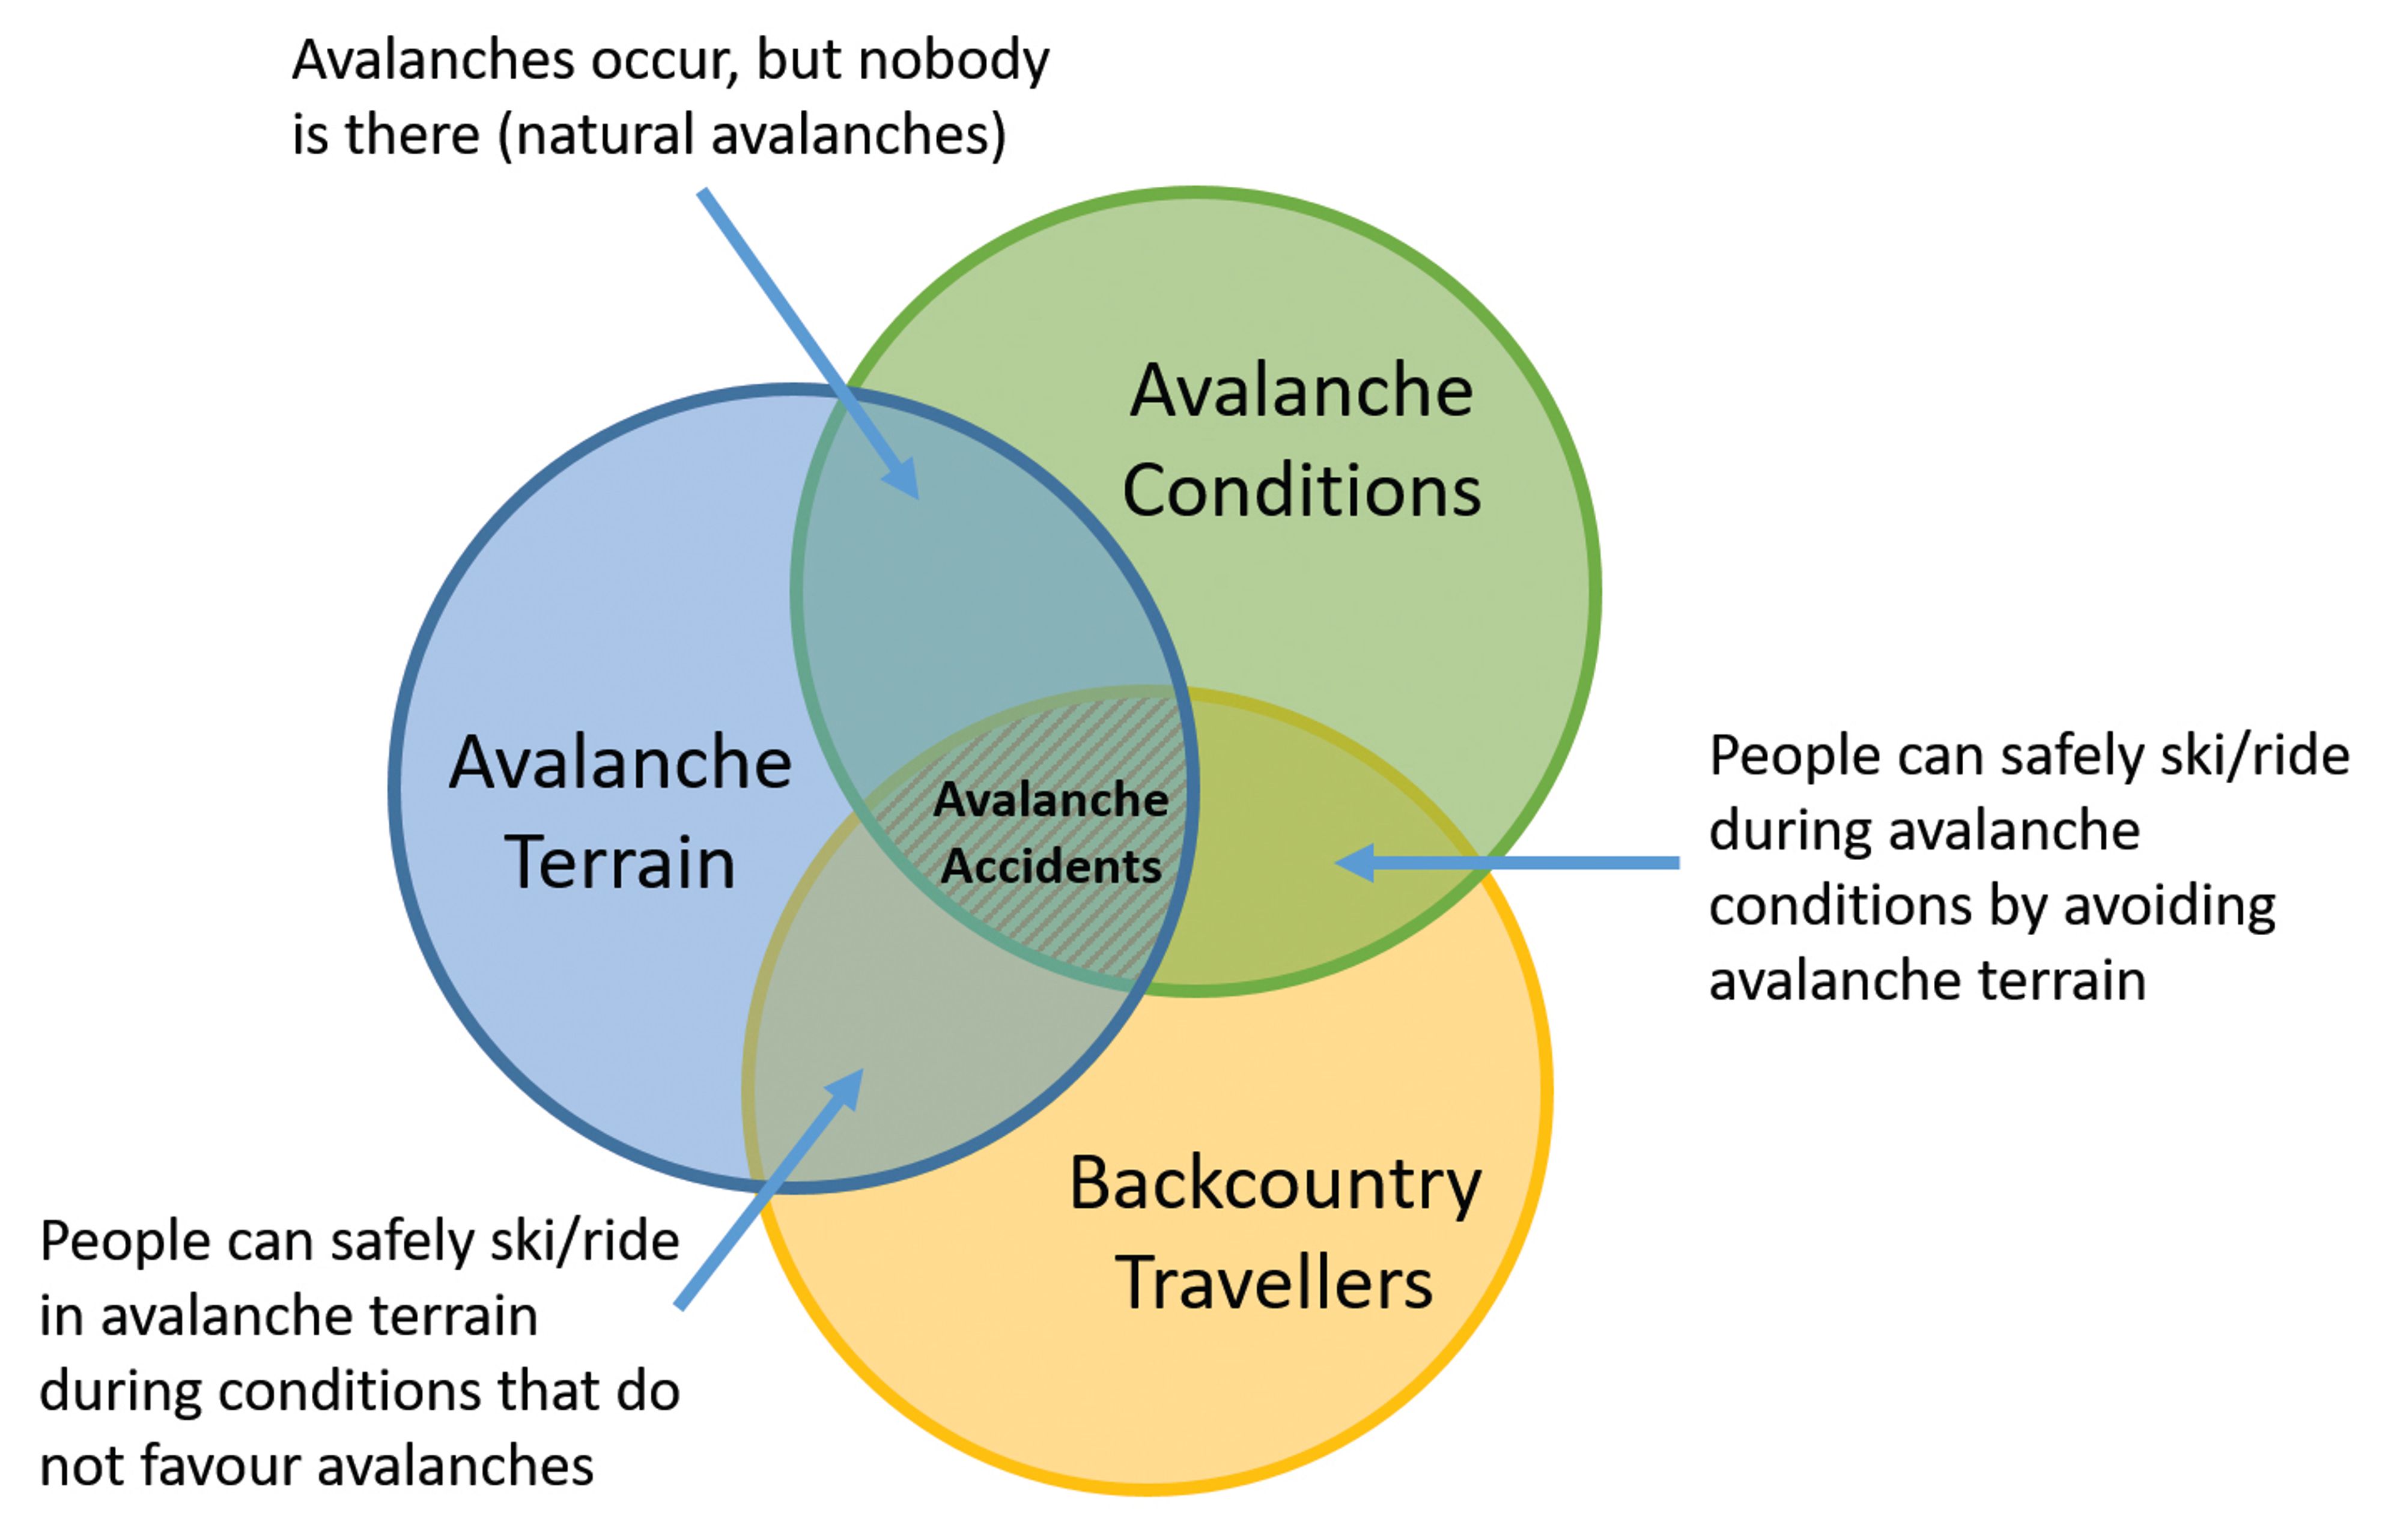 Avalanches accidents occur when backcountry travellers are exposed to avalanche terrain during conditions that can produce avalanches.